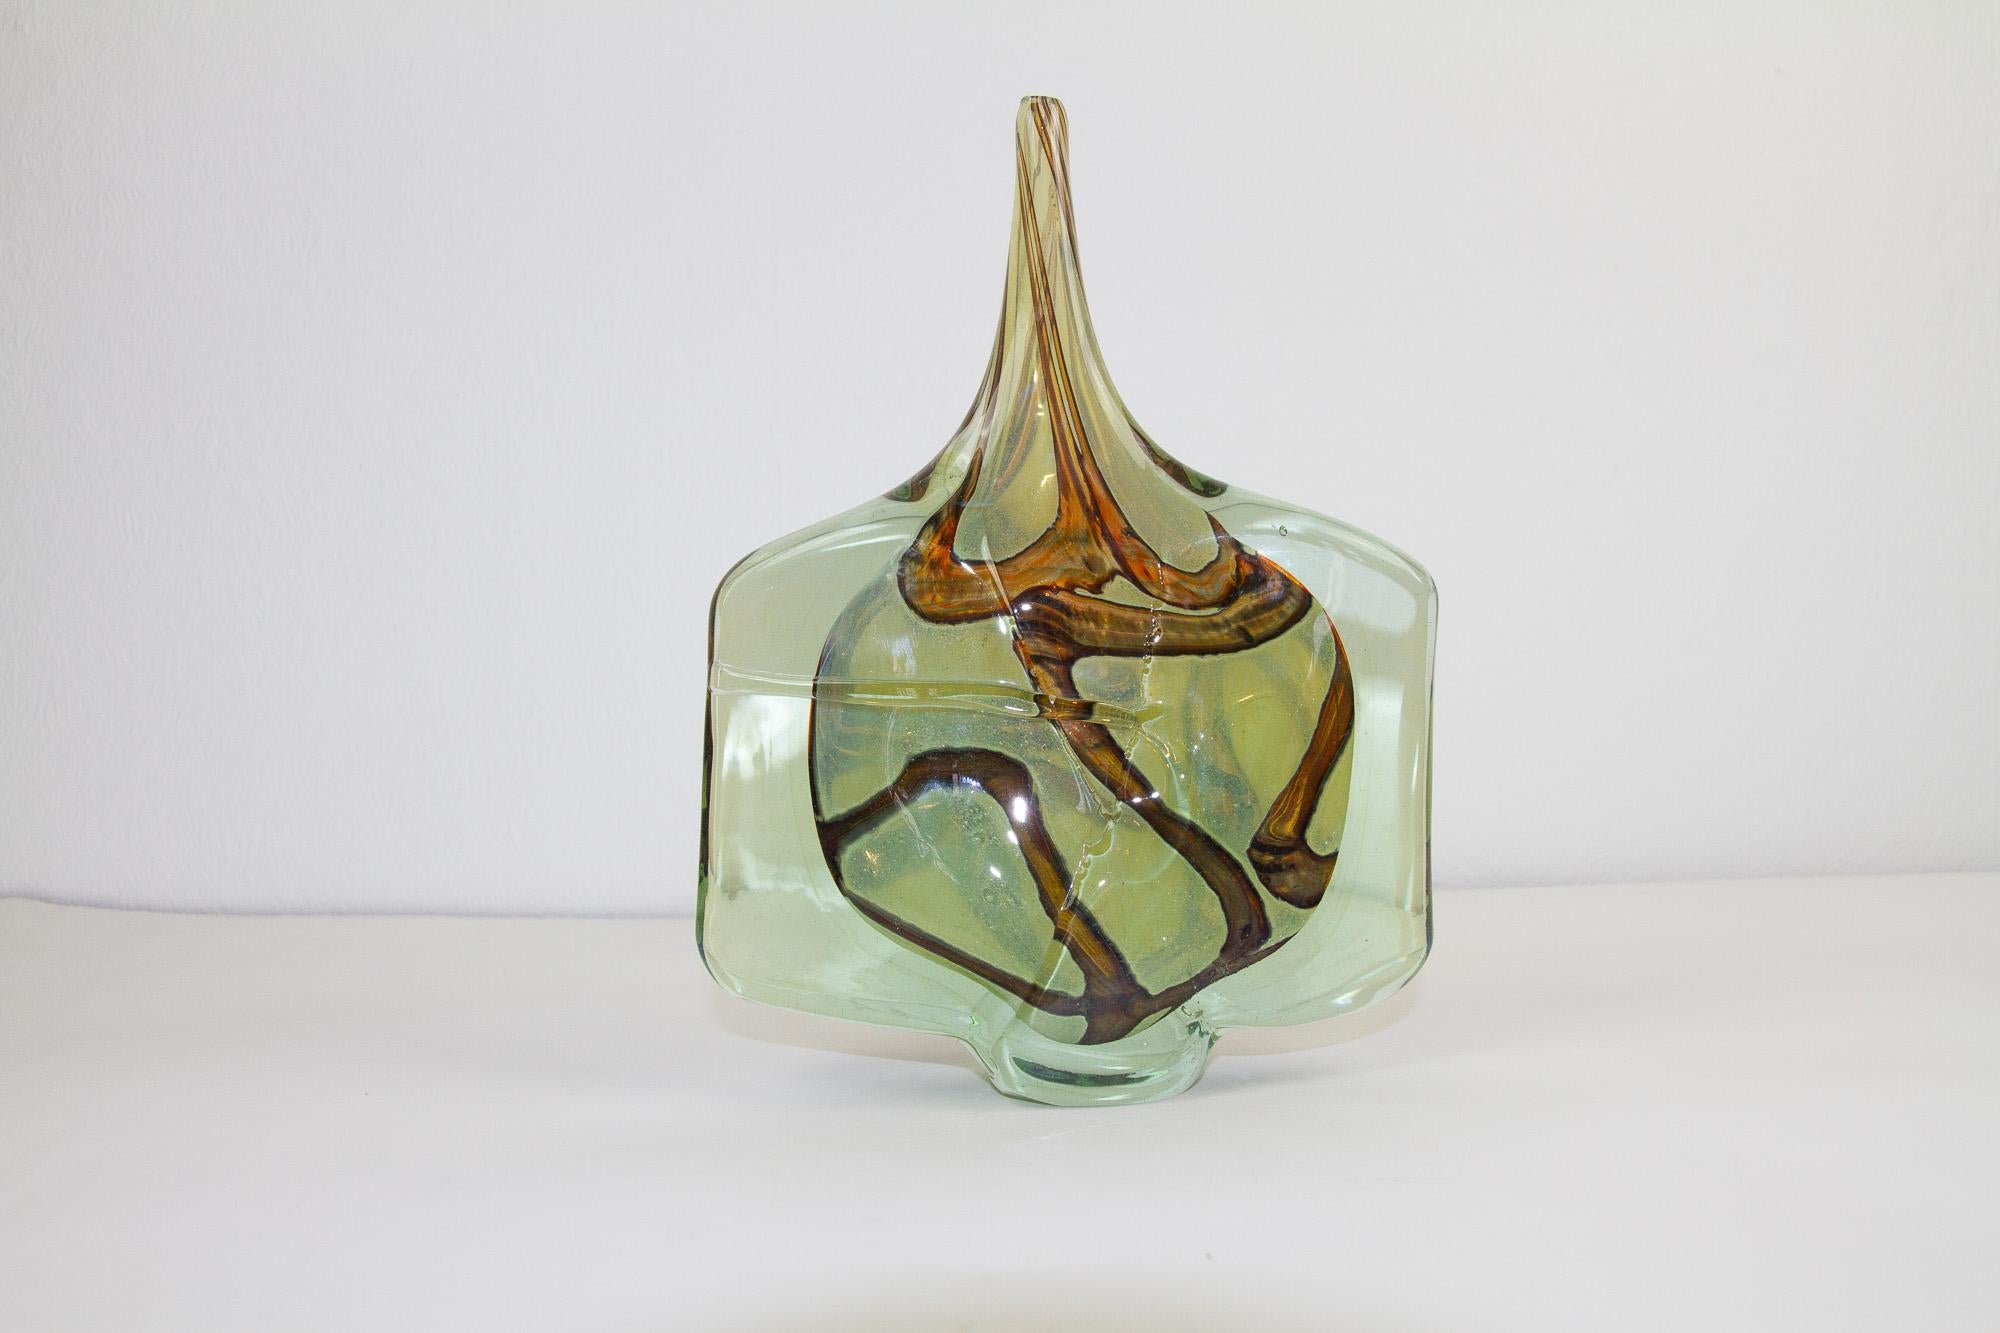 Large Vintage Mdina Glass Fish Vase by Michael Harris, 1980.
Iconic Maltese hand crafted art glass vase 